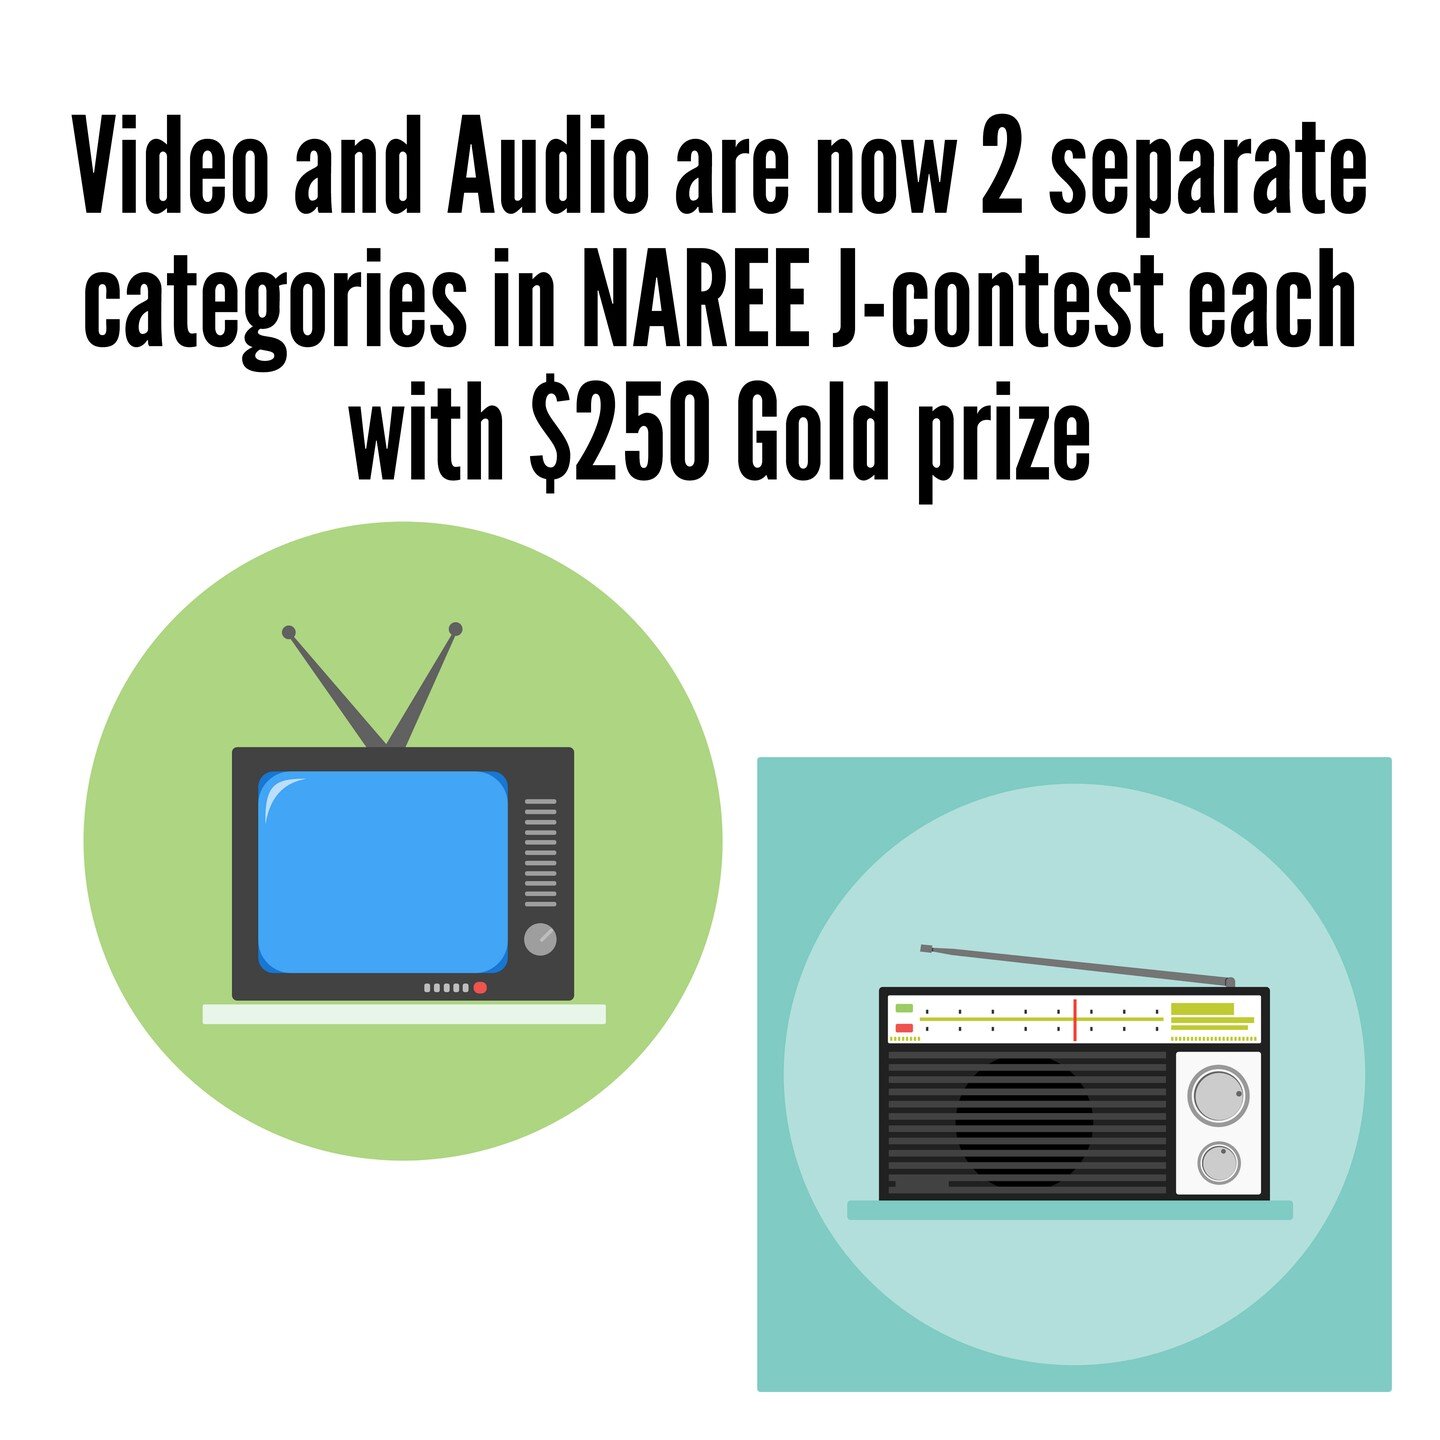 NAREE's real estate journalism contest has split the video/audio category into two separate categories, each with a $250 gold prize. Enter your audio story (radio, podcast, etc) in category 17 and/or your video story (tv, streaming, etc) in category 